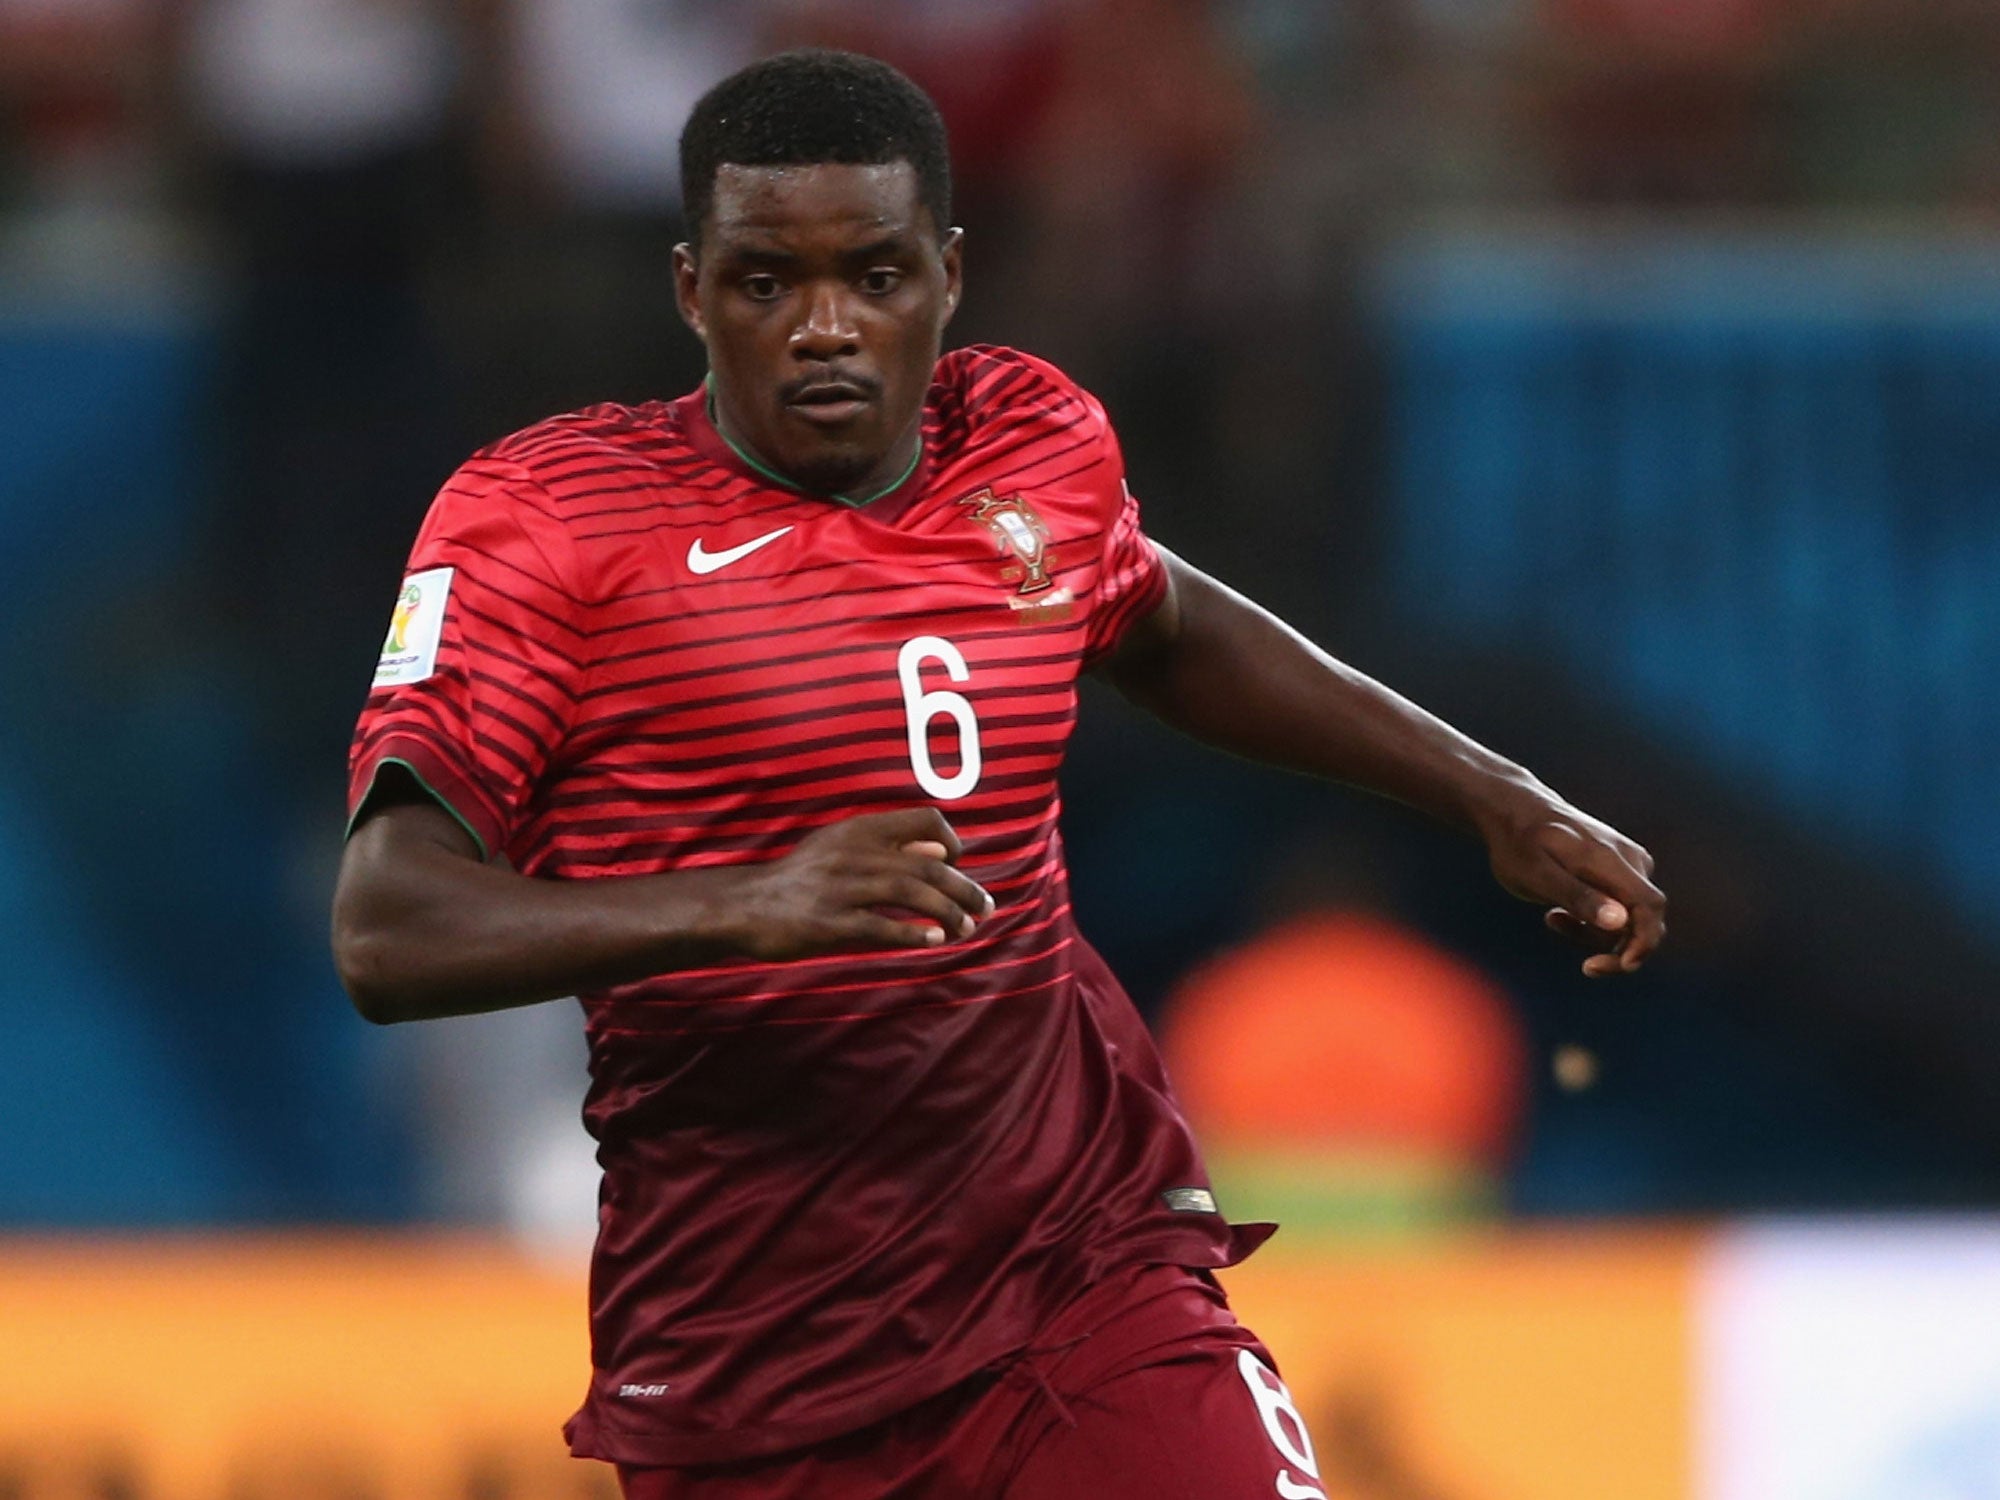 Sporting Lisbon's William Carvalho is a reported target for Arsenal